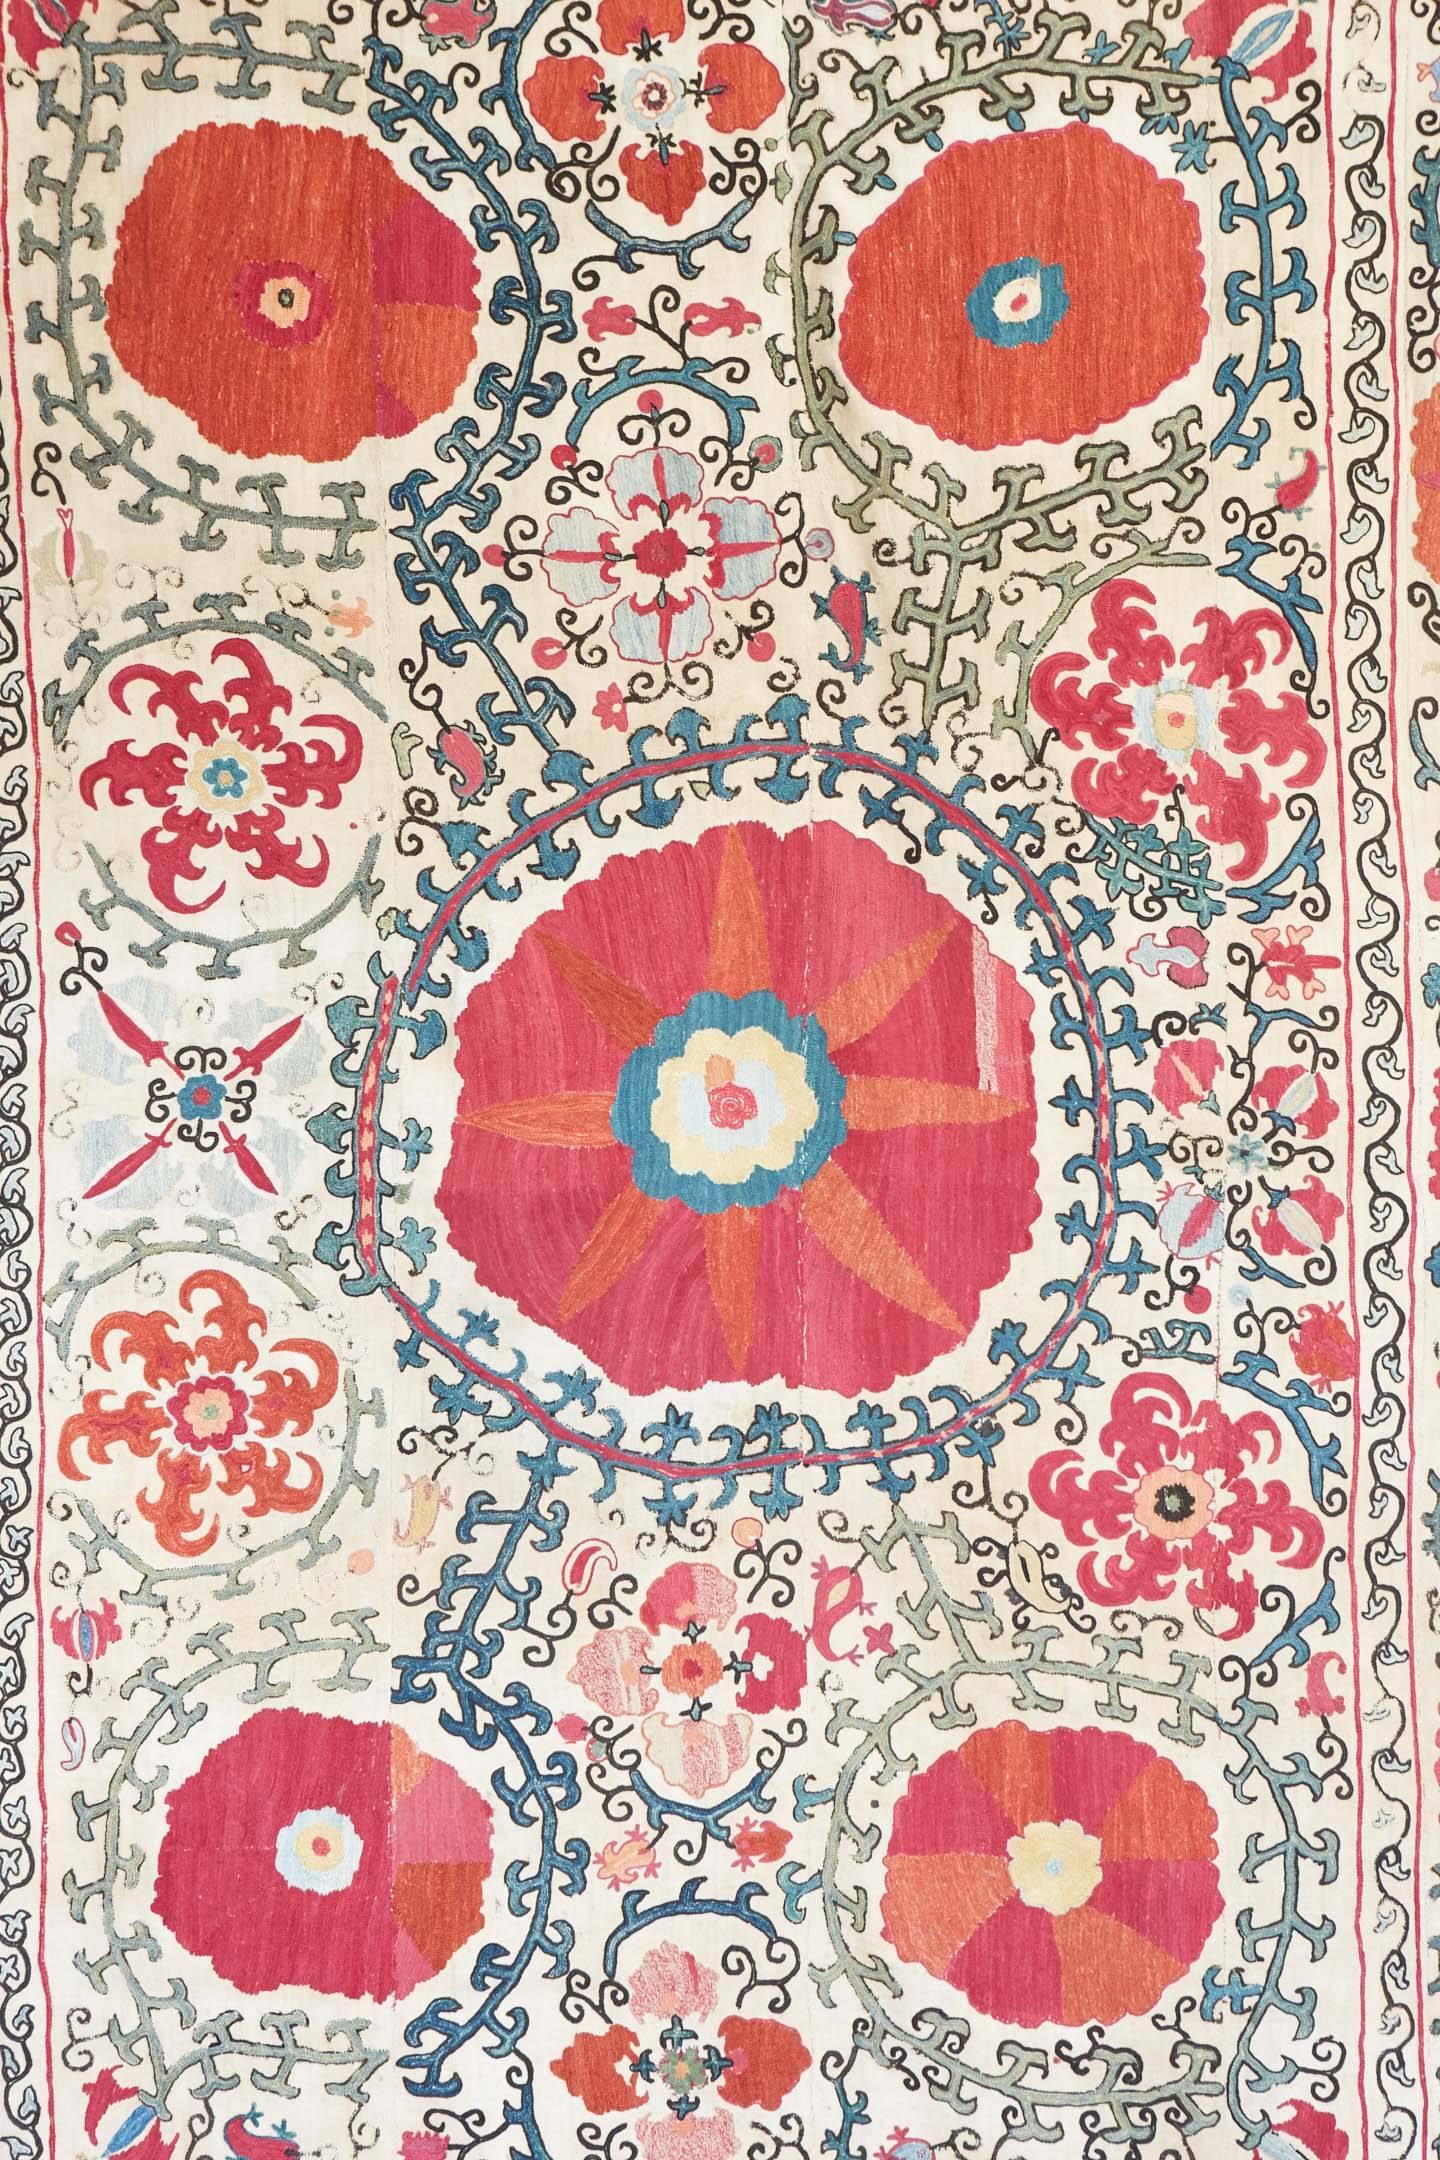 19th century Central Asian Susani dowry piece. Pomegranate design. Chain and satin stitch silk embroidery on cotton panels. 